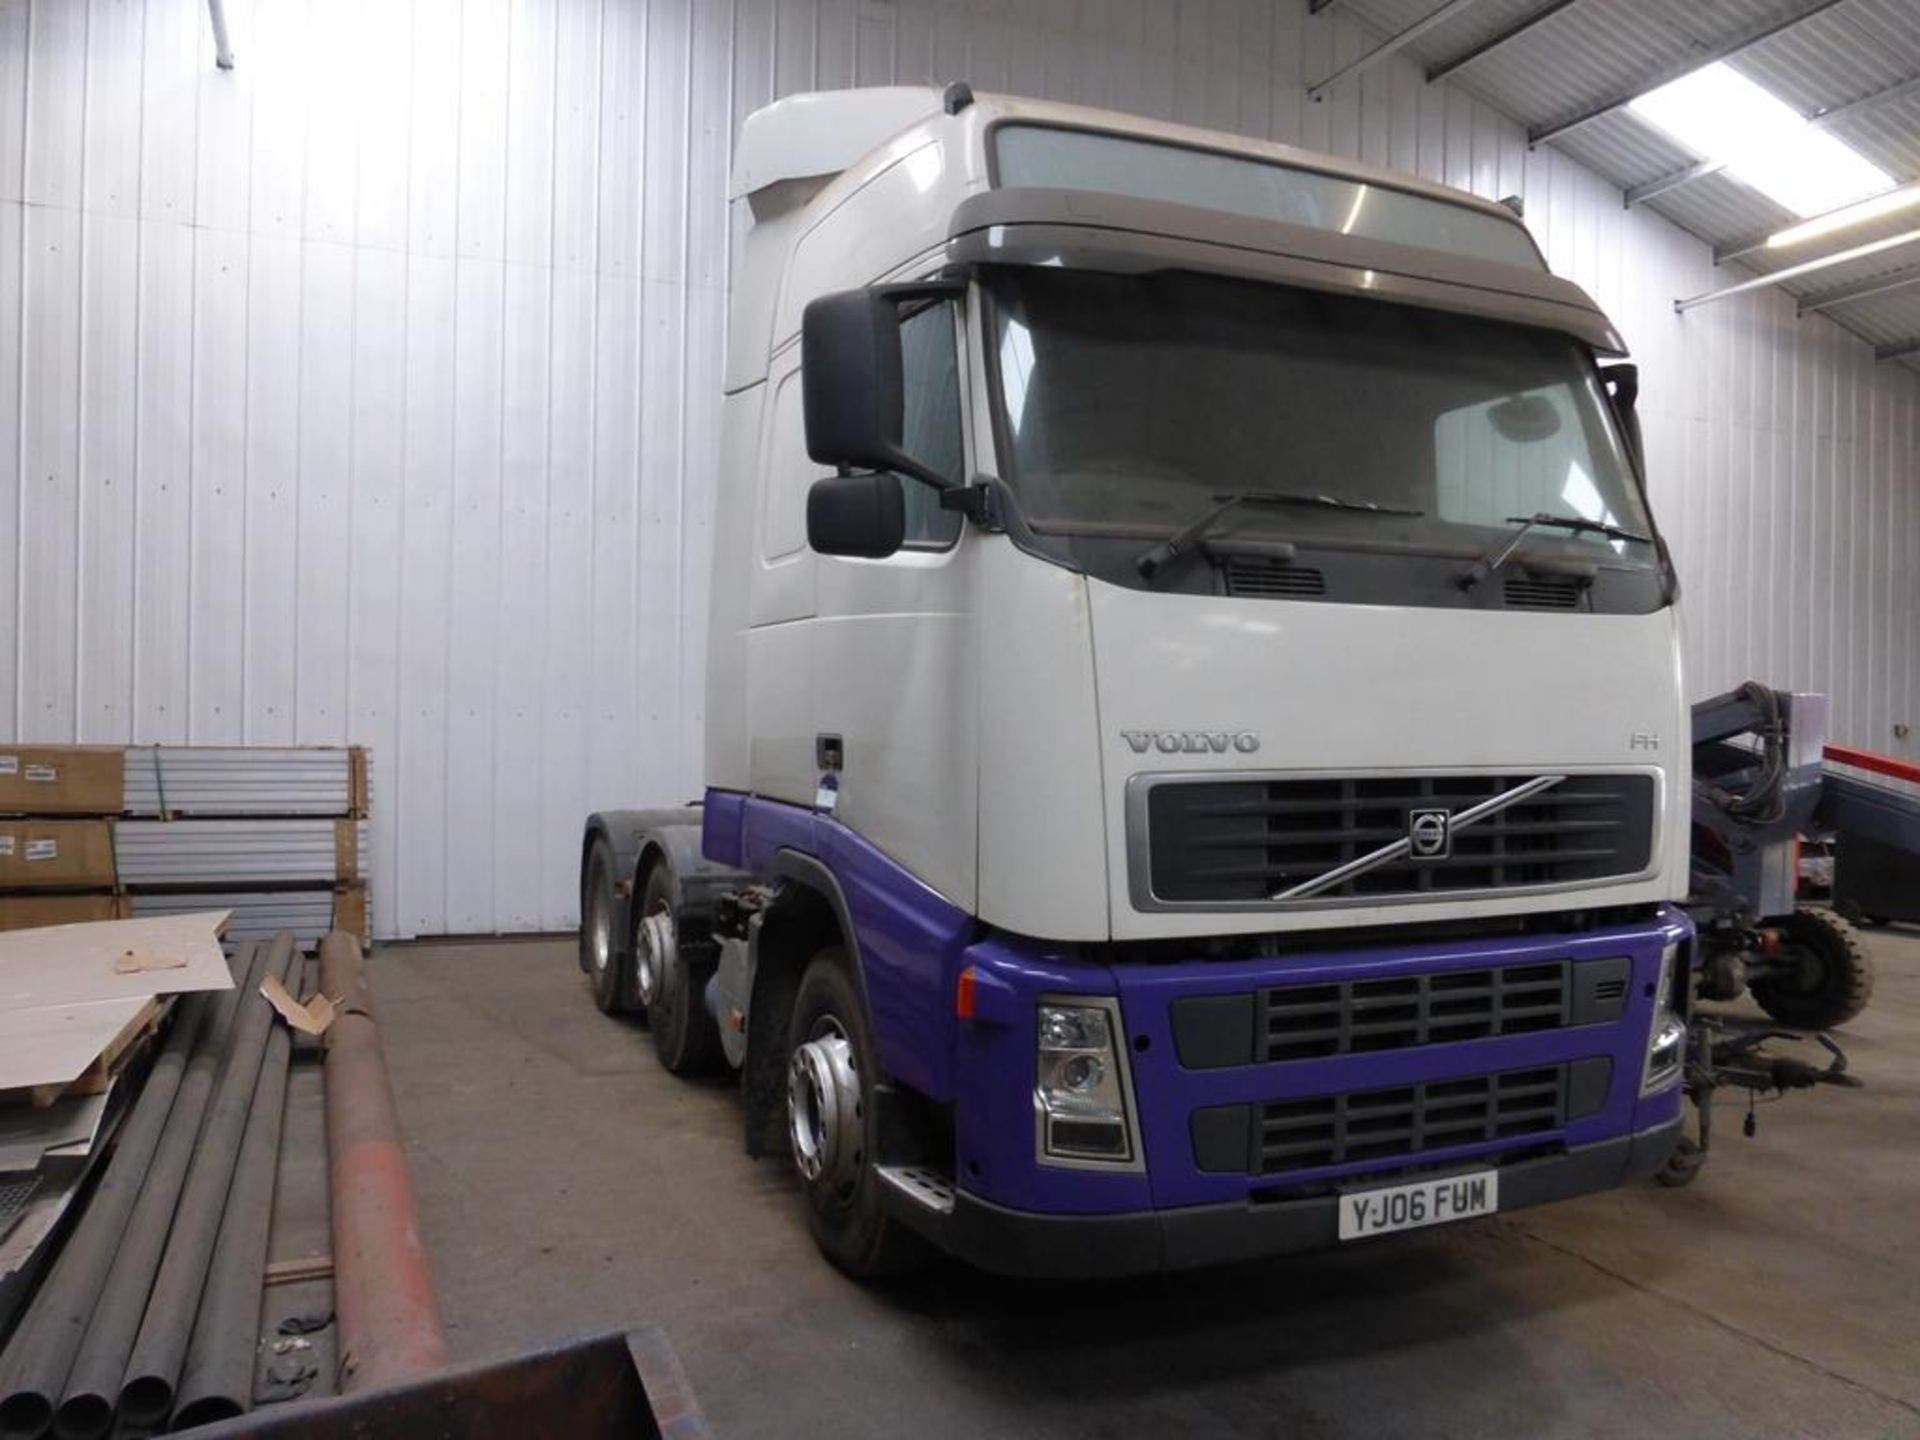 2006 Volvo FH12-16 Triaxle Tractor Unit - Image 2 of 12